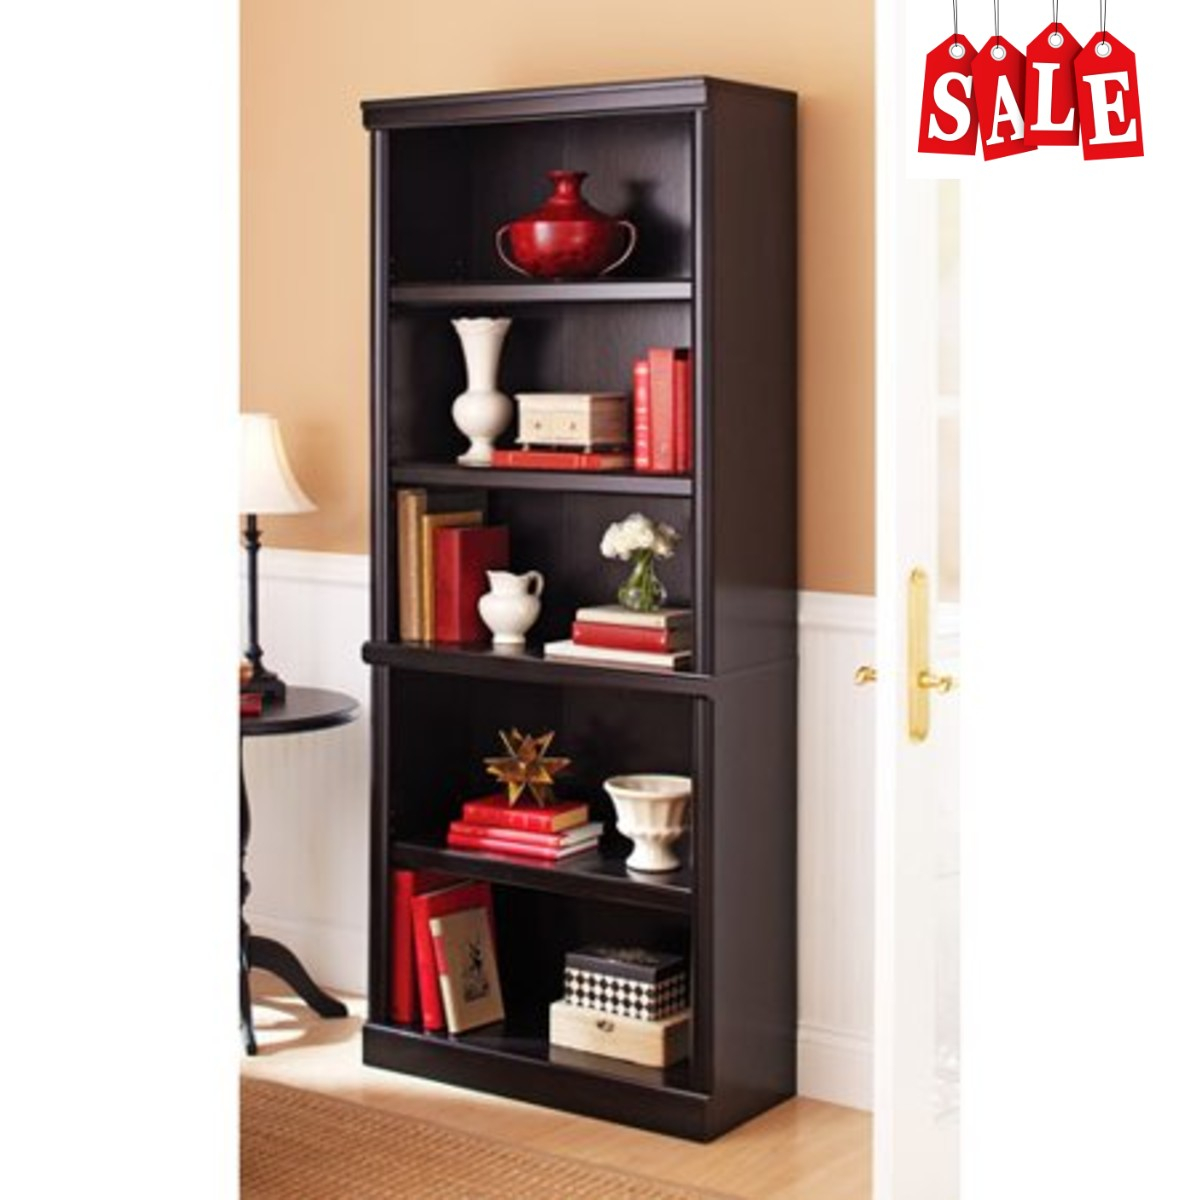 Details About 5 Shelf Solid Wooden Bookcase Tall Narrow Bookshelves Vintage Black Home Office within dimensions 1200 X 1200